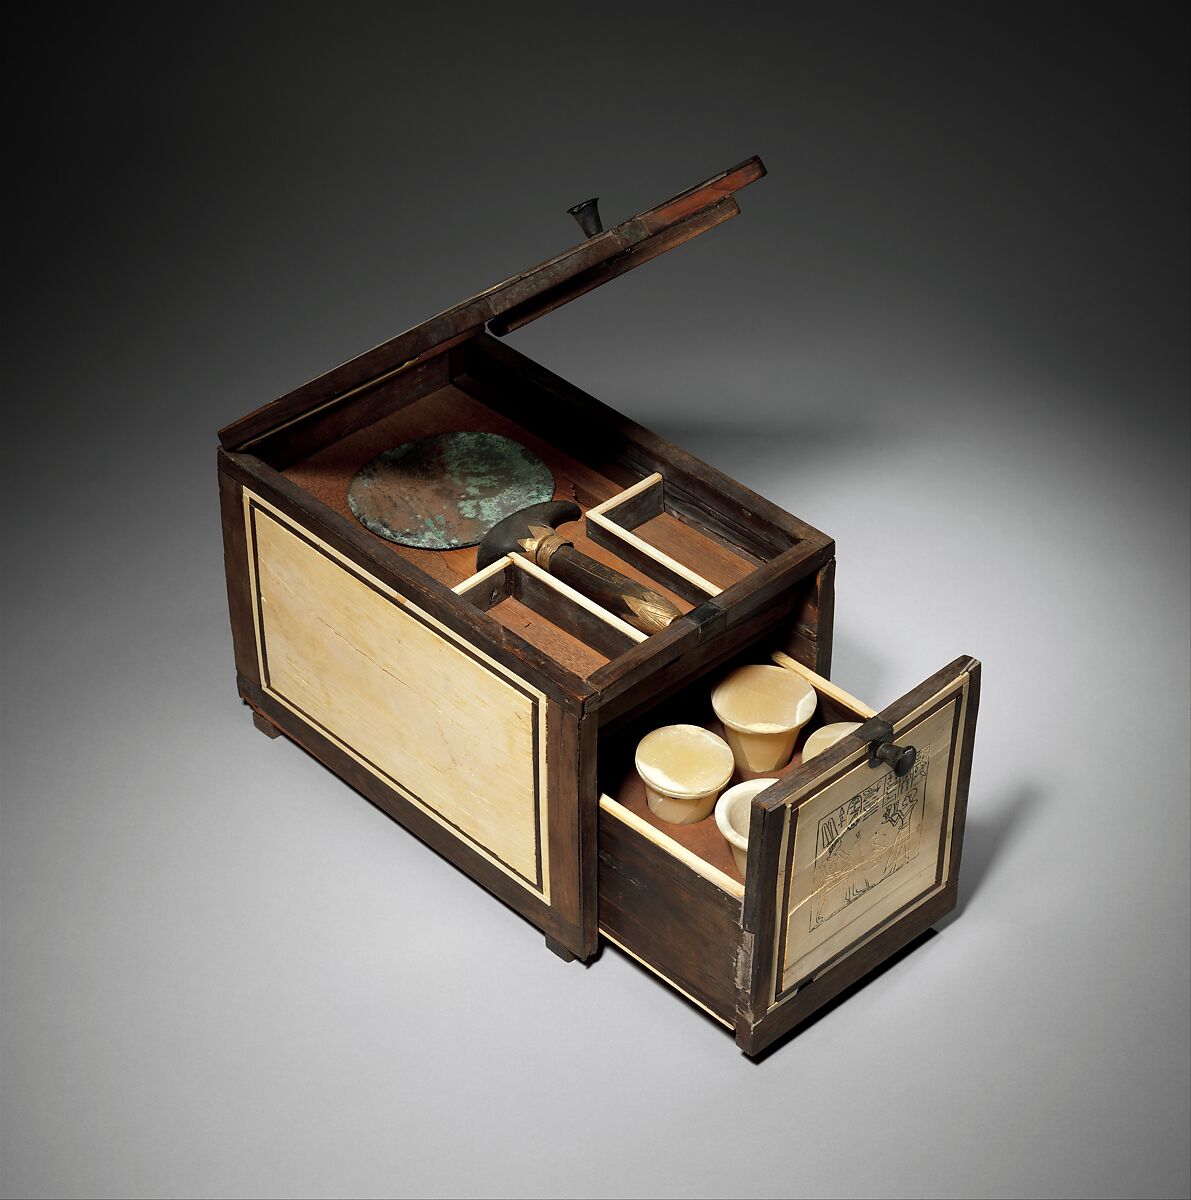 Cosmetic Box of the Royal Butler Kemeni, Cedar, with ebony and ivory veneer and silver mounts 